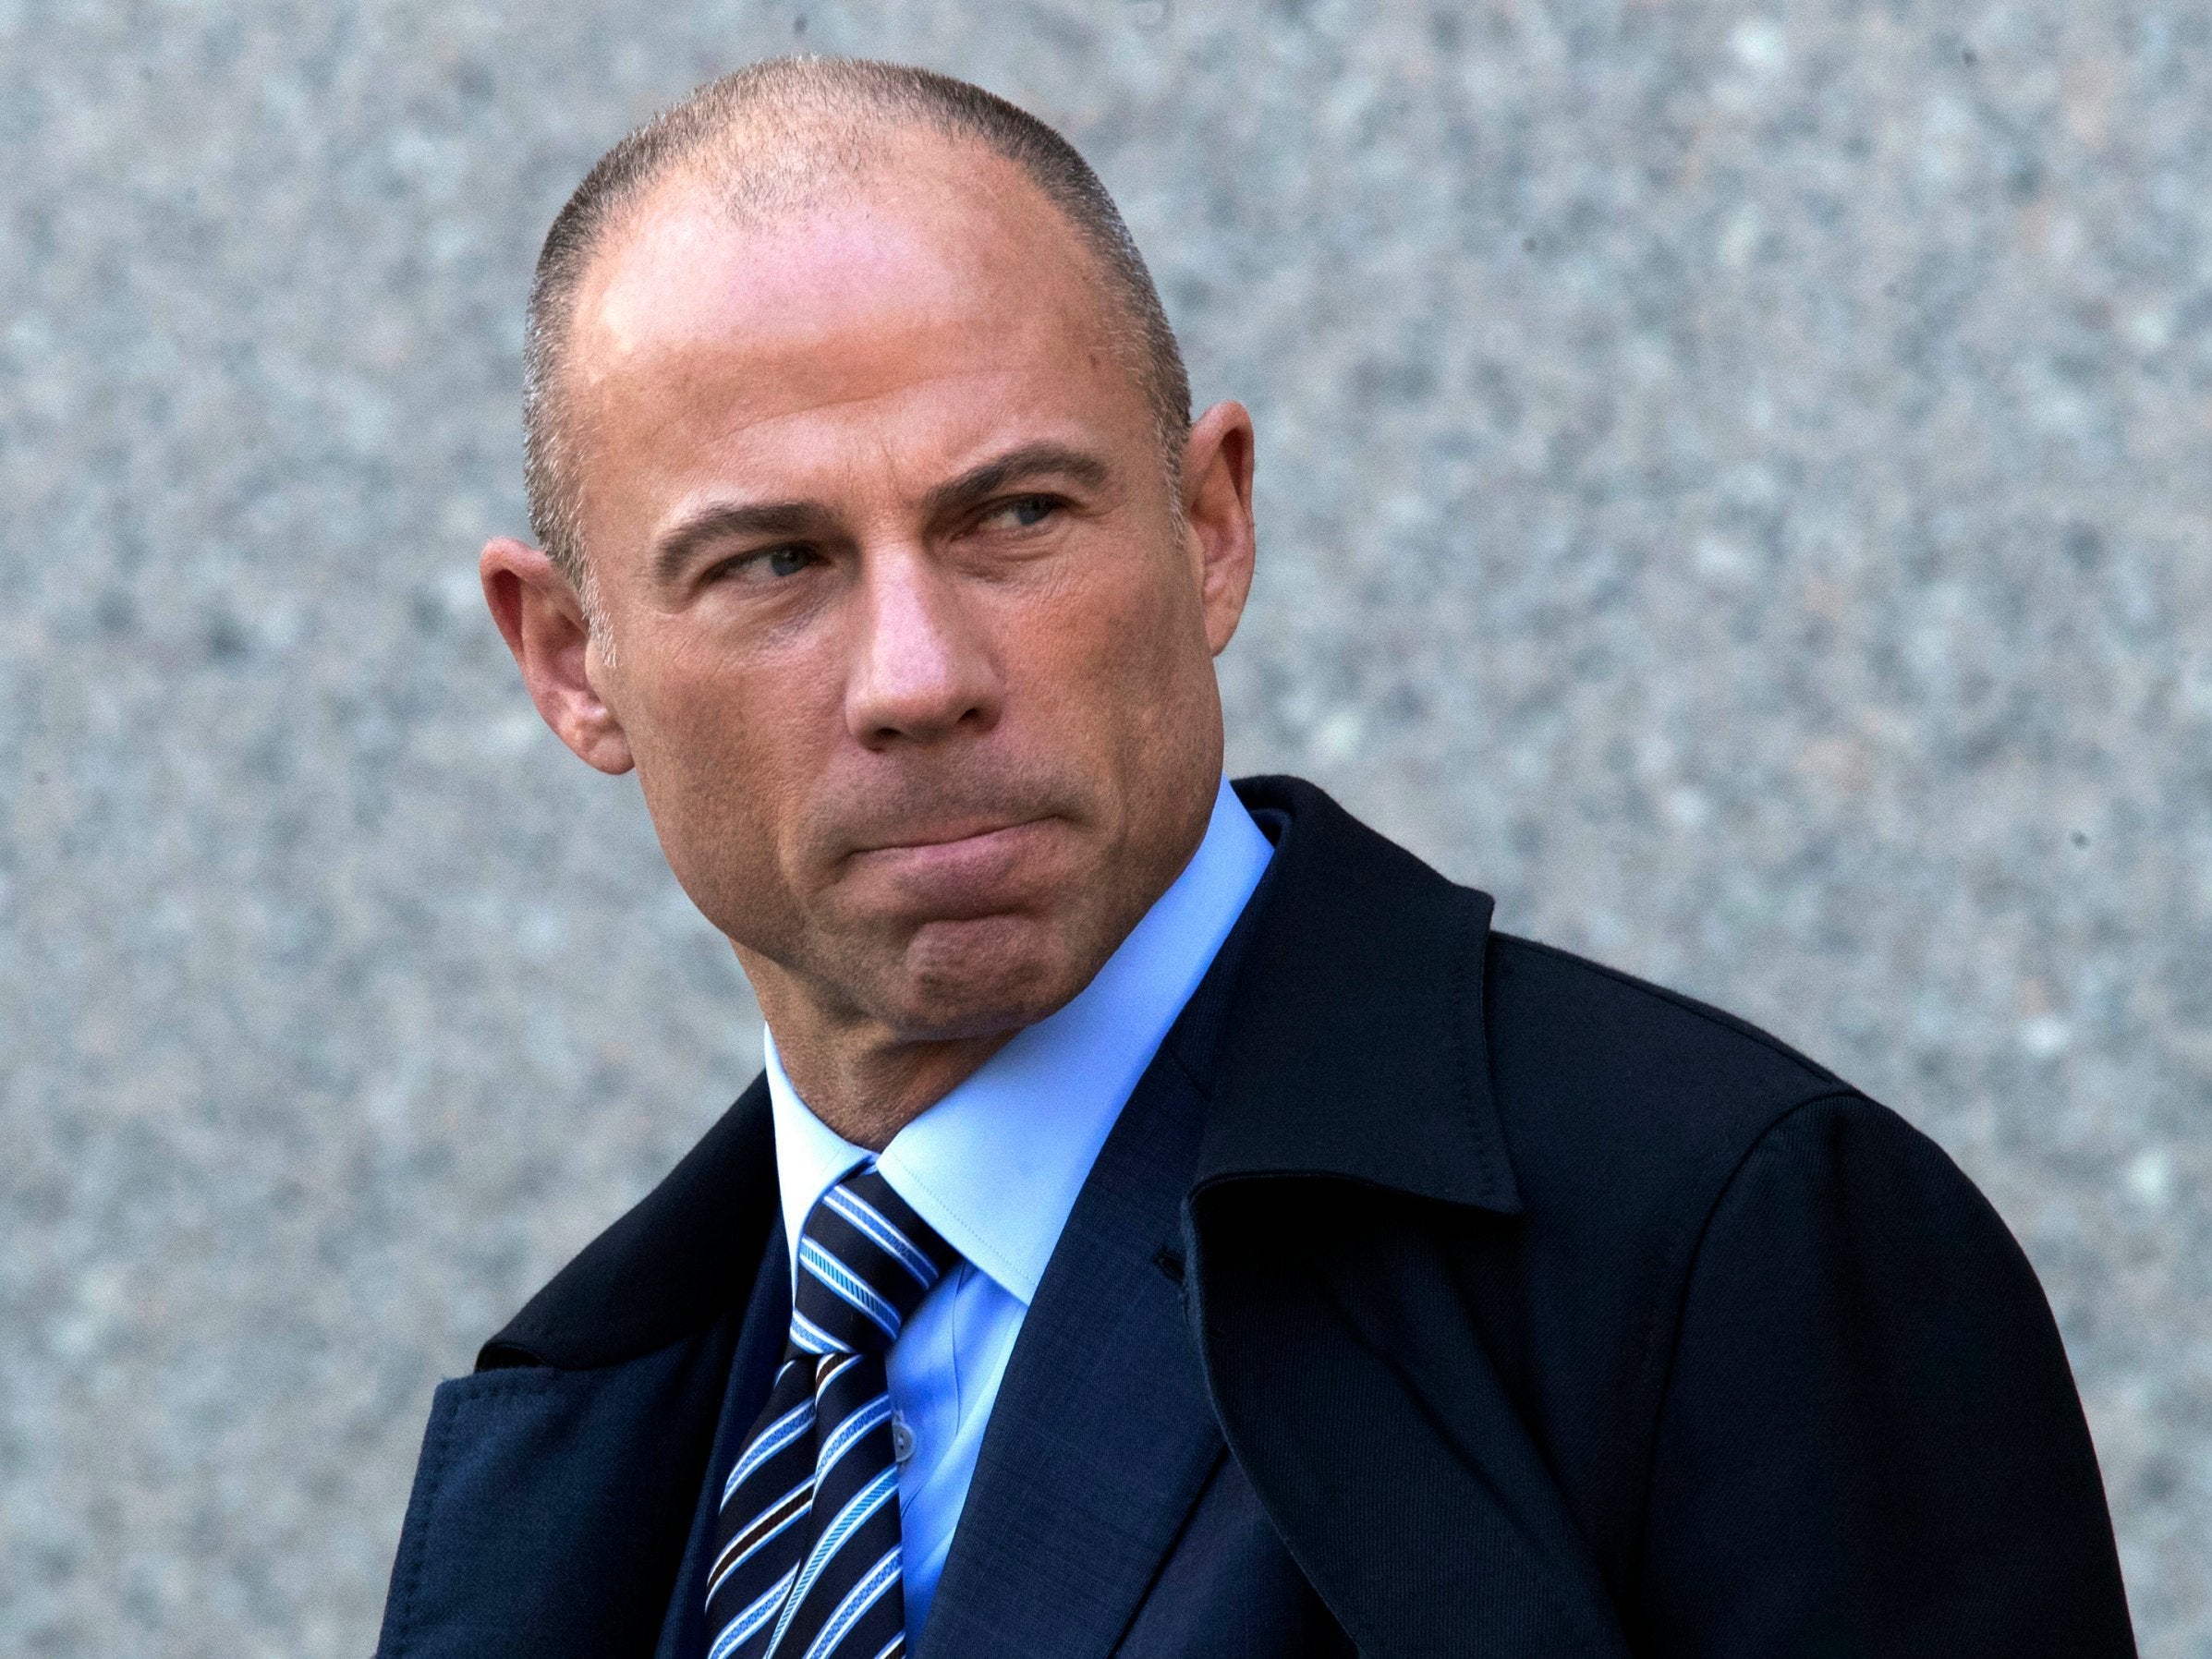 Michael Avenatti was taken into custody in Los Angeles on Wednesday, the unnamed official said